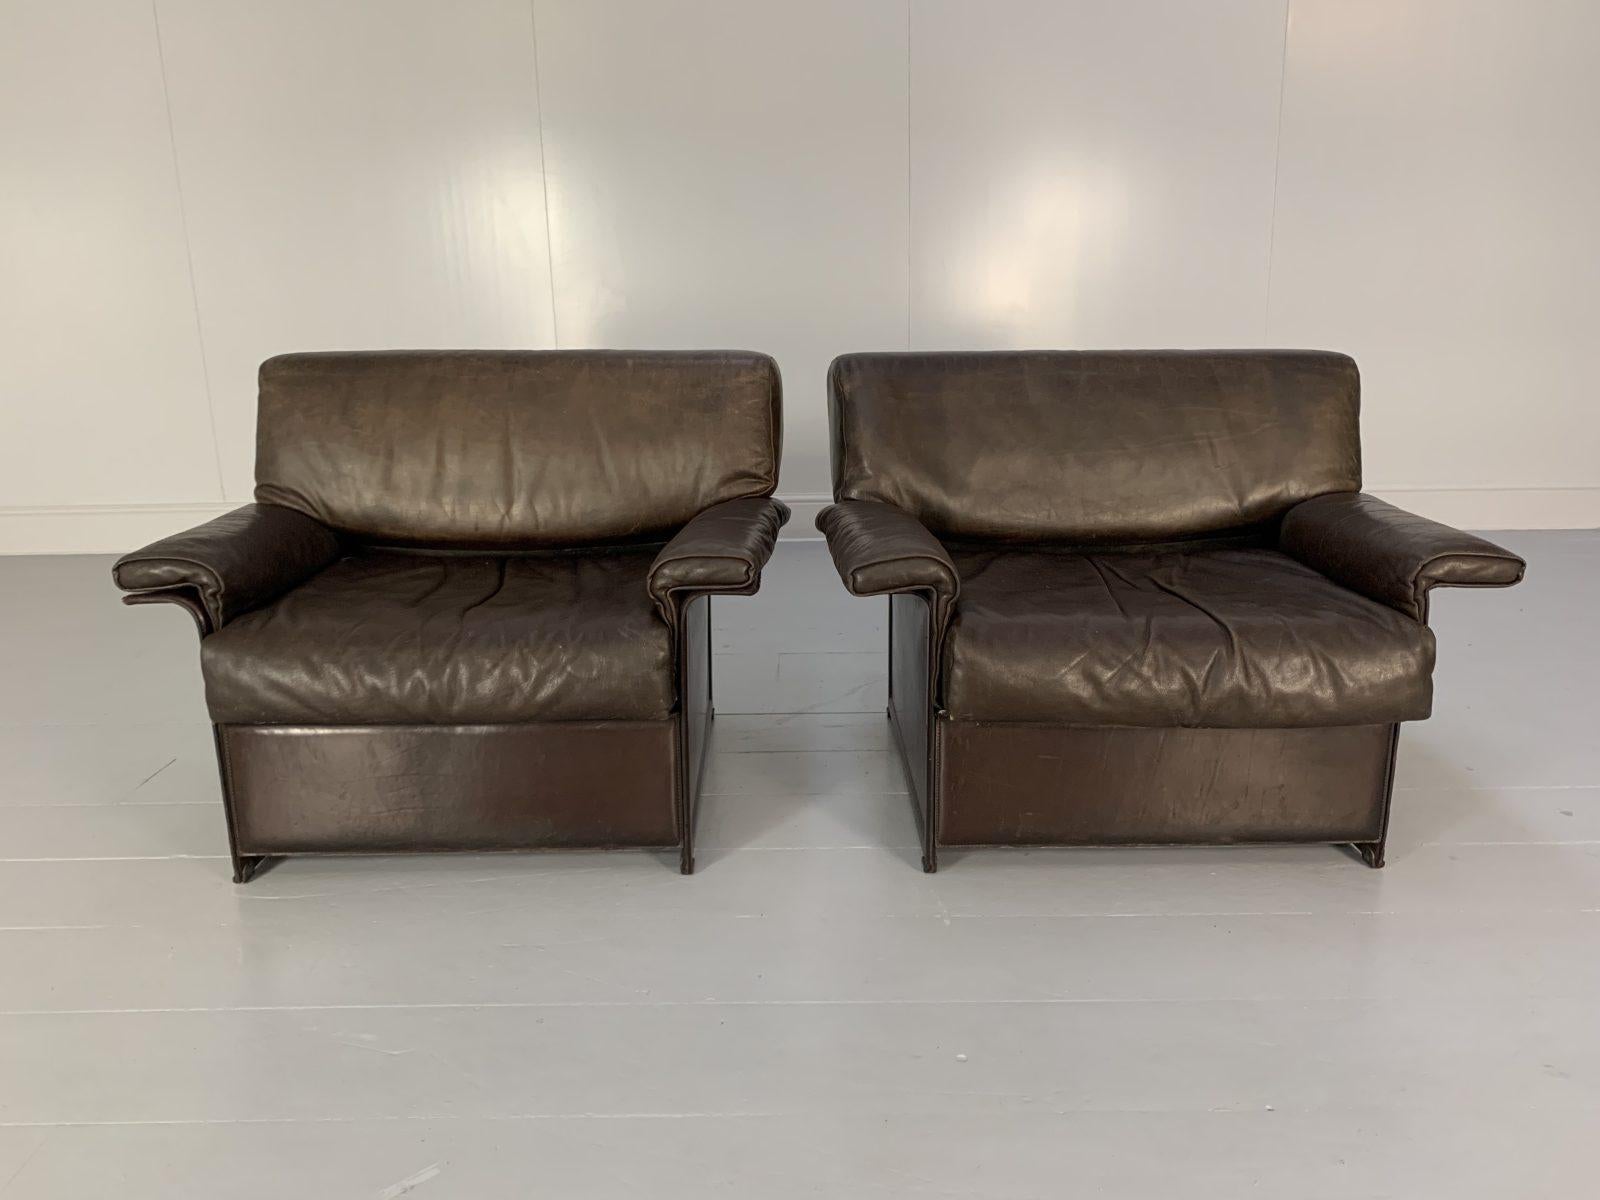 Contemporary Pair of Matteo Grassi “Tm” Armchairs – in Vintage Brown Leather For Sale